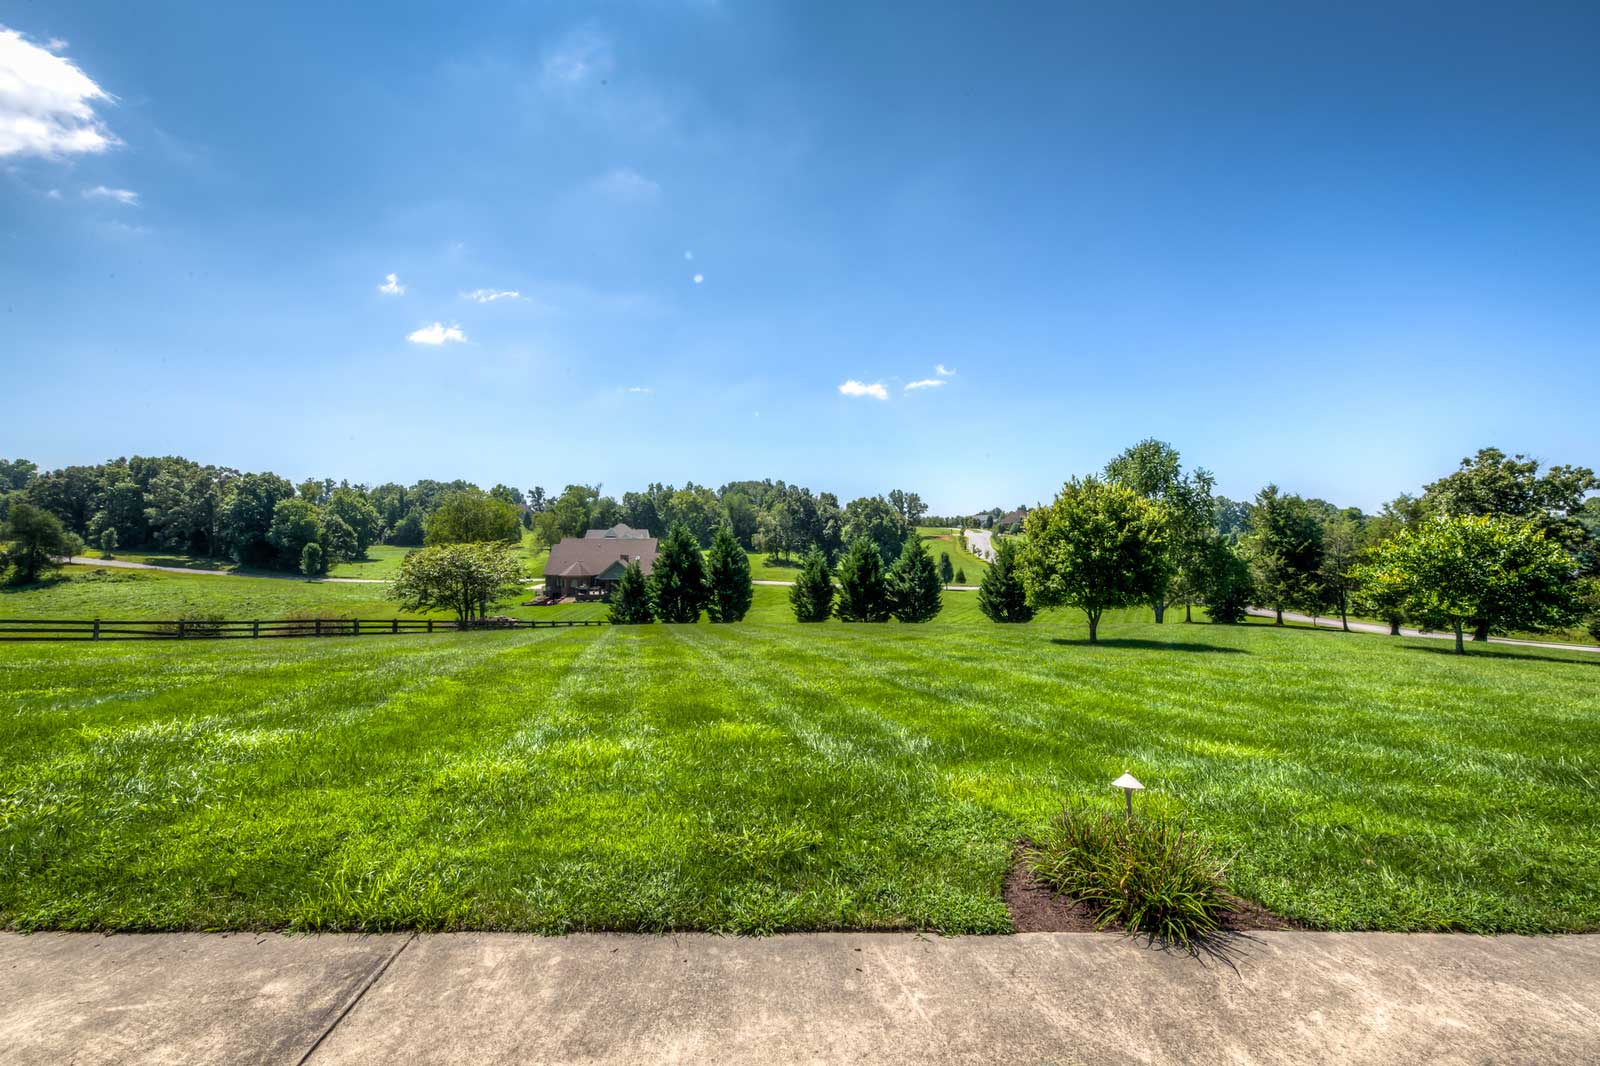 Buying Land Is a Good Move for Retirees - The Reserve at Leonard Farms - a gated community in Bristol, TN